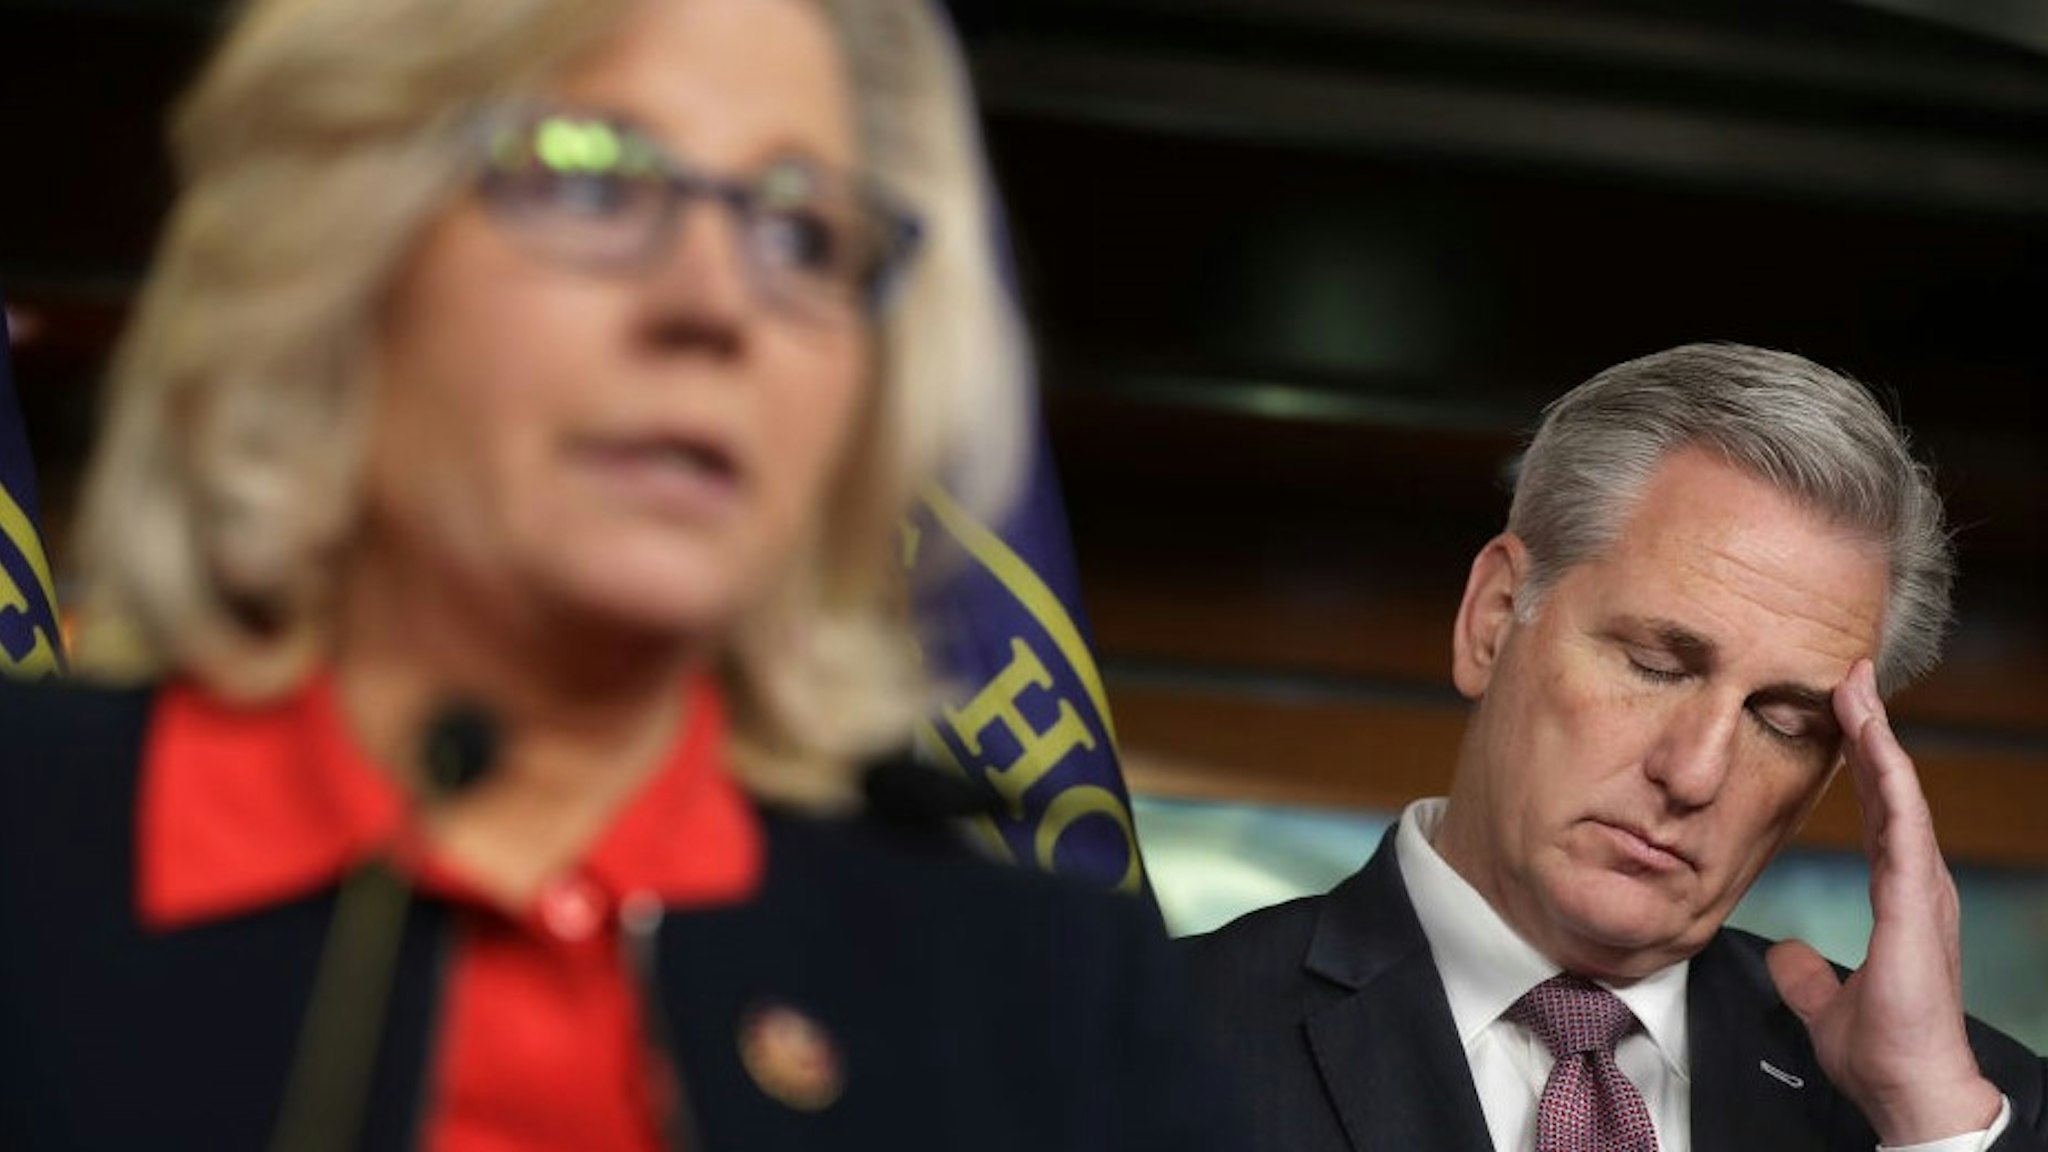 WASHINGTON, DC - FEBRUARY 13: House Minority Leader Kevin McCarthy (R-CA) (R) listens to House Republican Conference Chair Rep. Liz Cheney (R-WY) during a news conference following a caucus meeting at the U.S. Capitol Visitors Center February 13, 2019 in Washington, DC. McCarthy said that he supports the framework of a bipartisan spending deal that would avert another partial federal government shutdown but is waiting to read the bill before deciding on whether he would vote for it. (Photo by